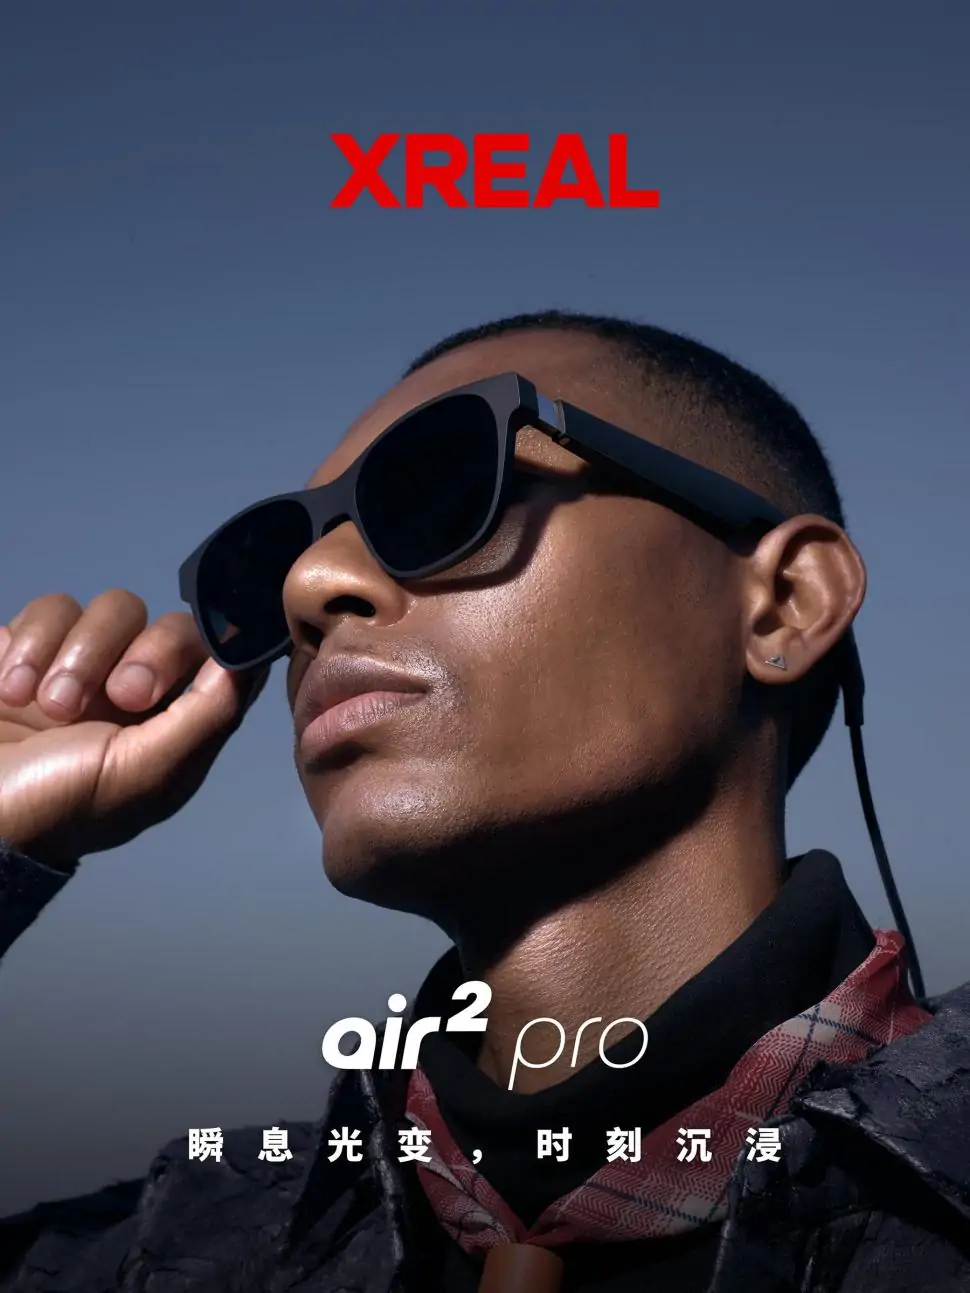 Xreal unveils next generation AR headsets featuring major upgrades